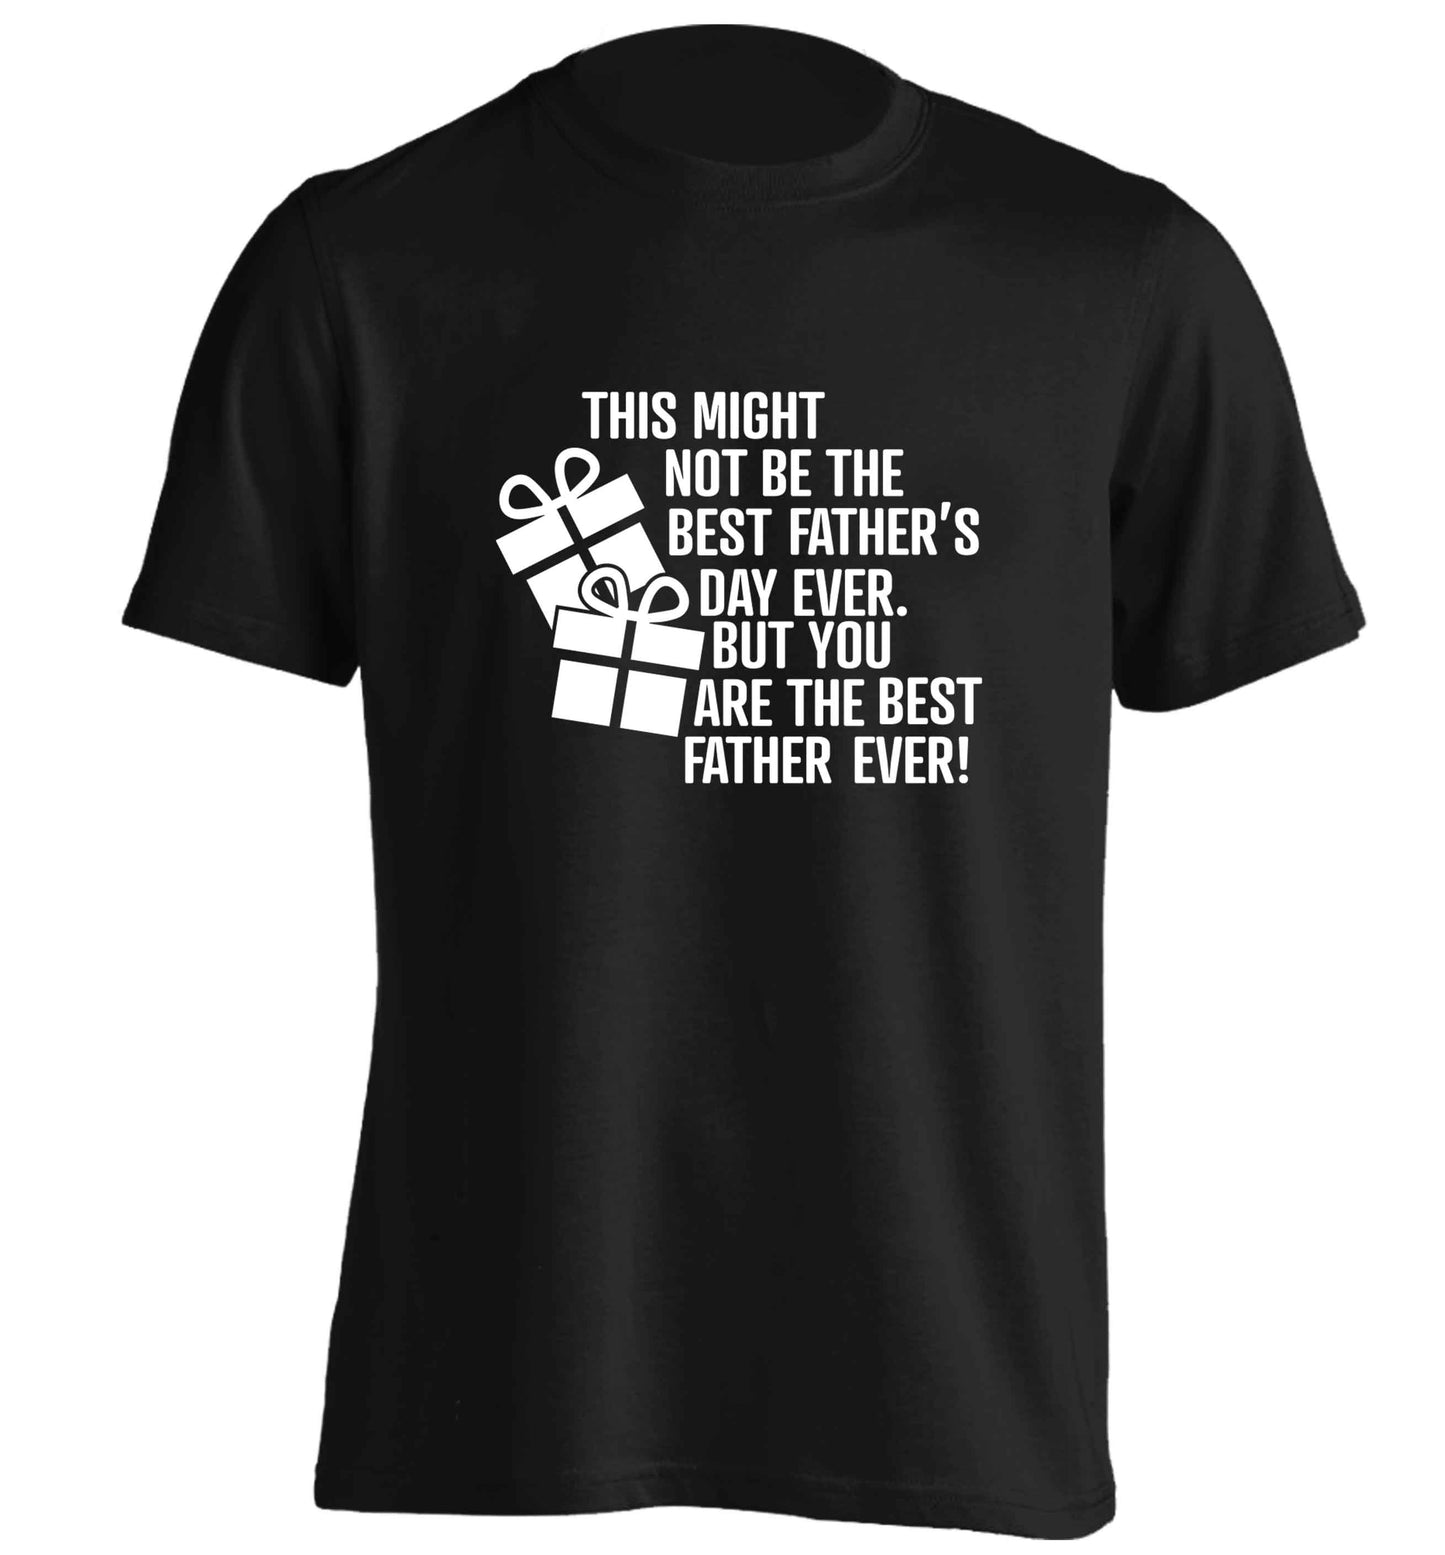 It might not be the best Father's Day ever but you are the best father ever! adults unisex black Tshirt 2XL